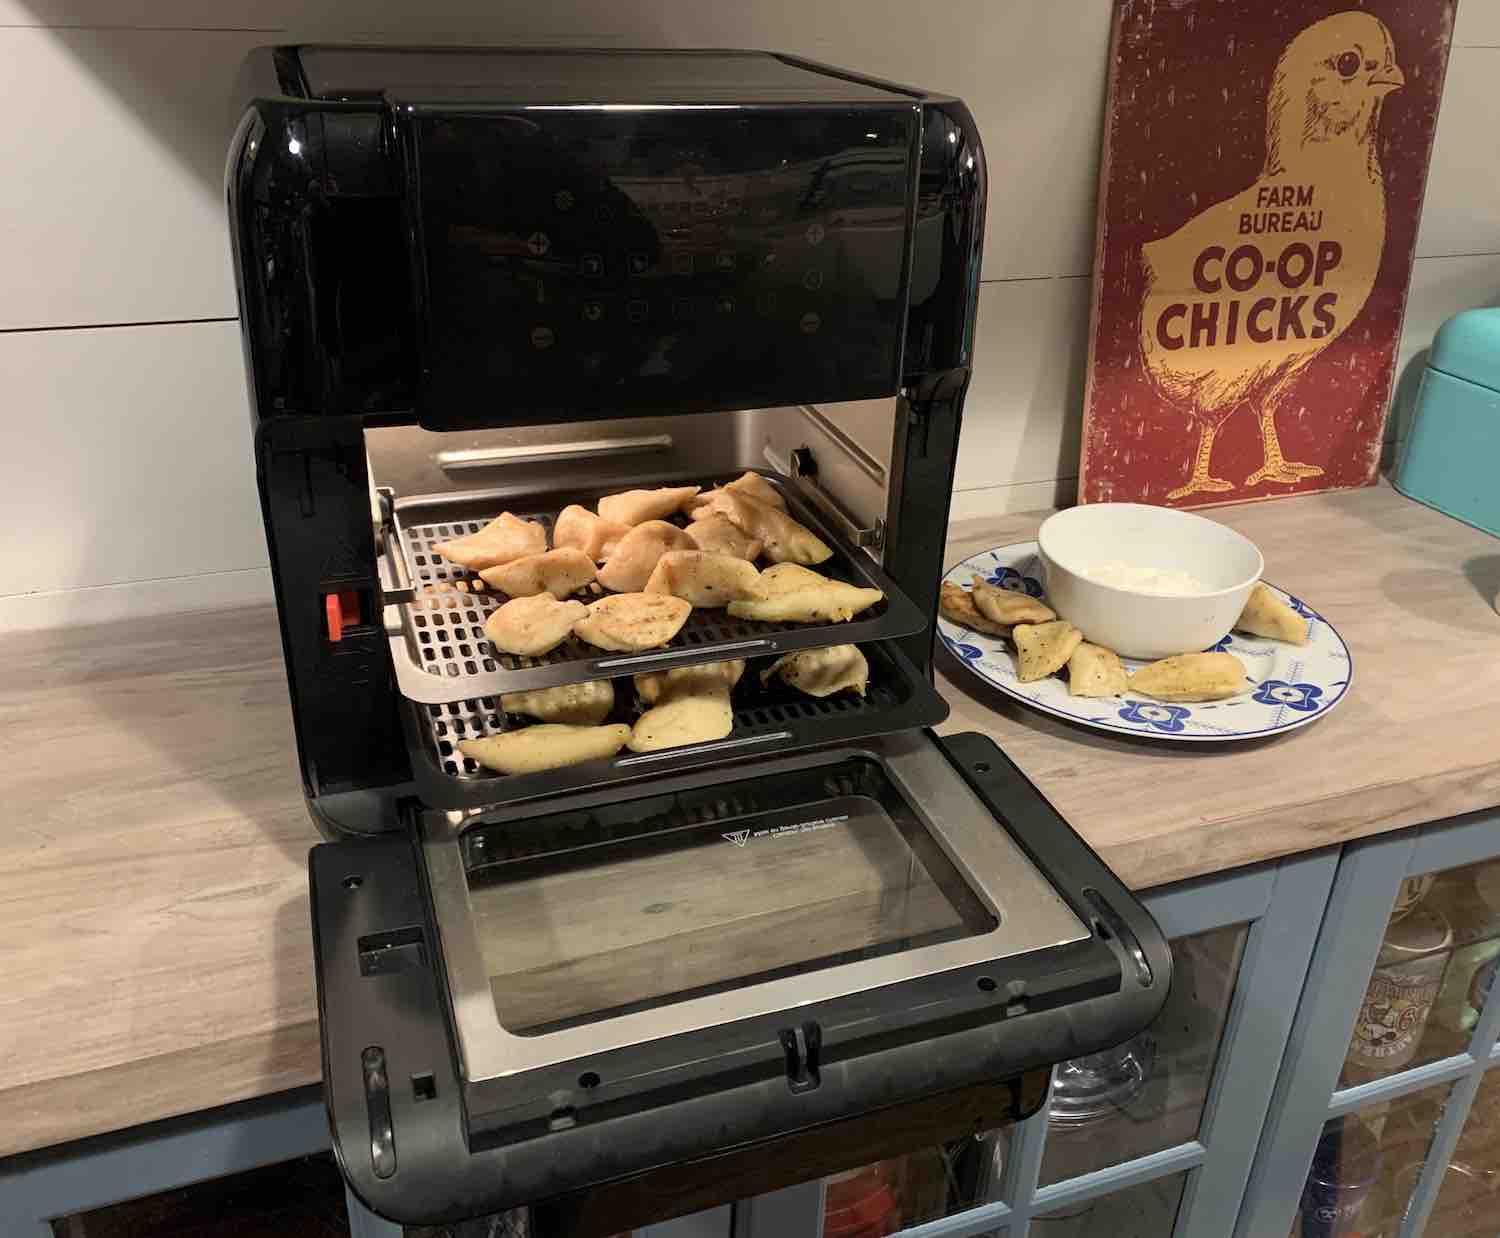 https://blog.bestbuy.ca/wp-content/uploads/2020/11/Insignia-air-fry-oven-demo-and-review.jpg